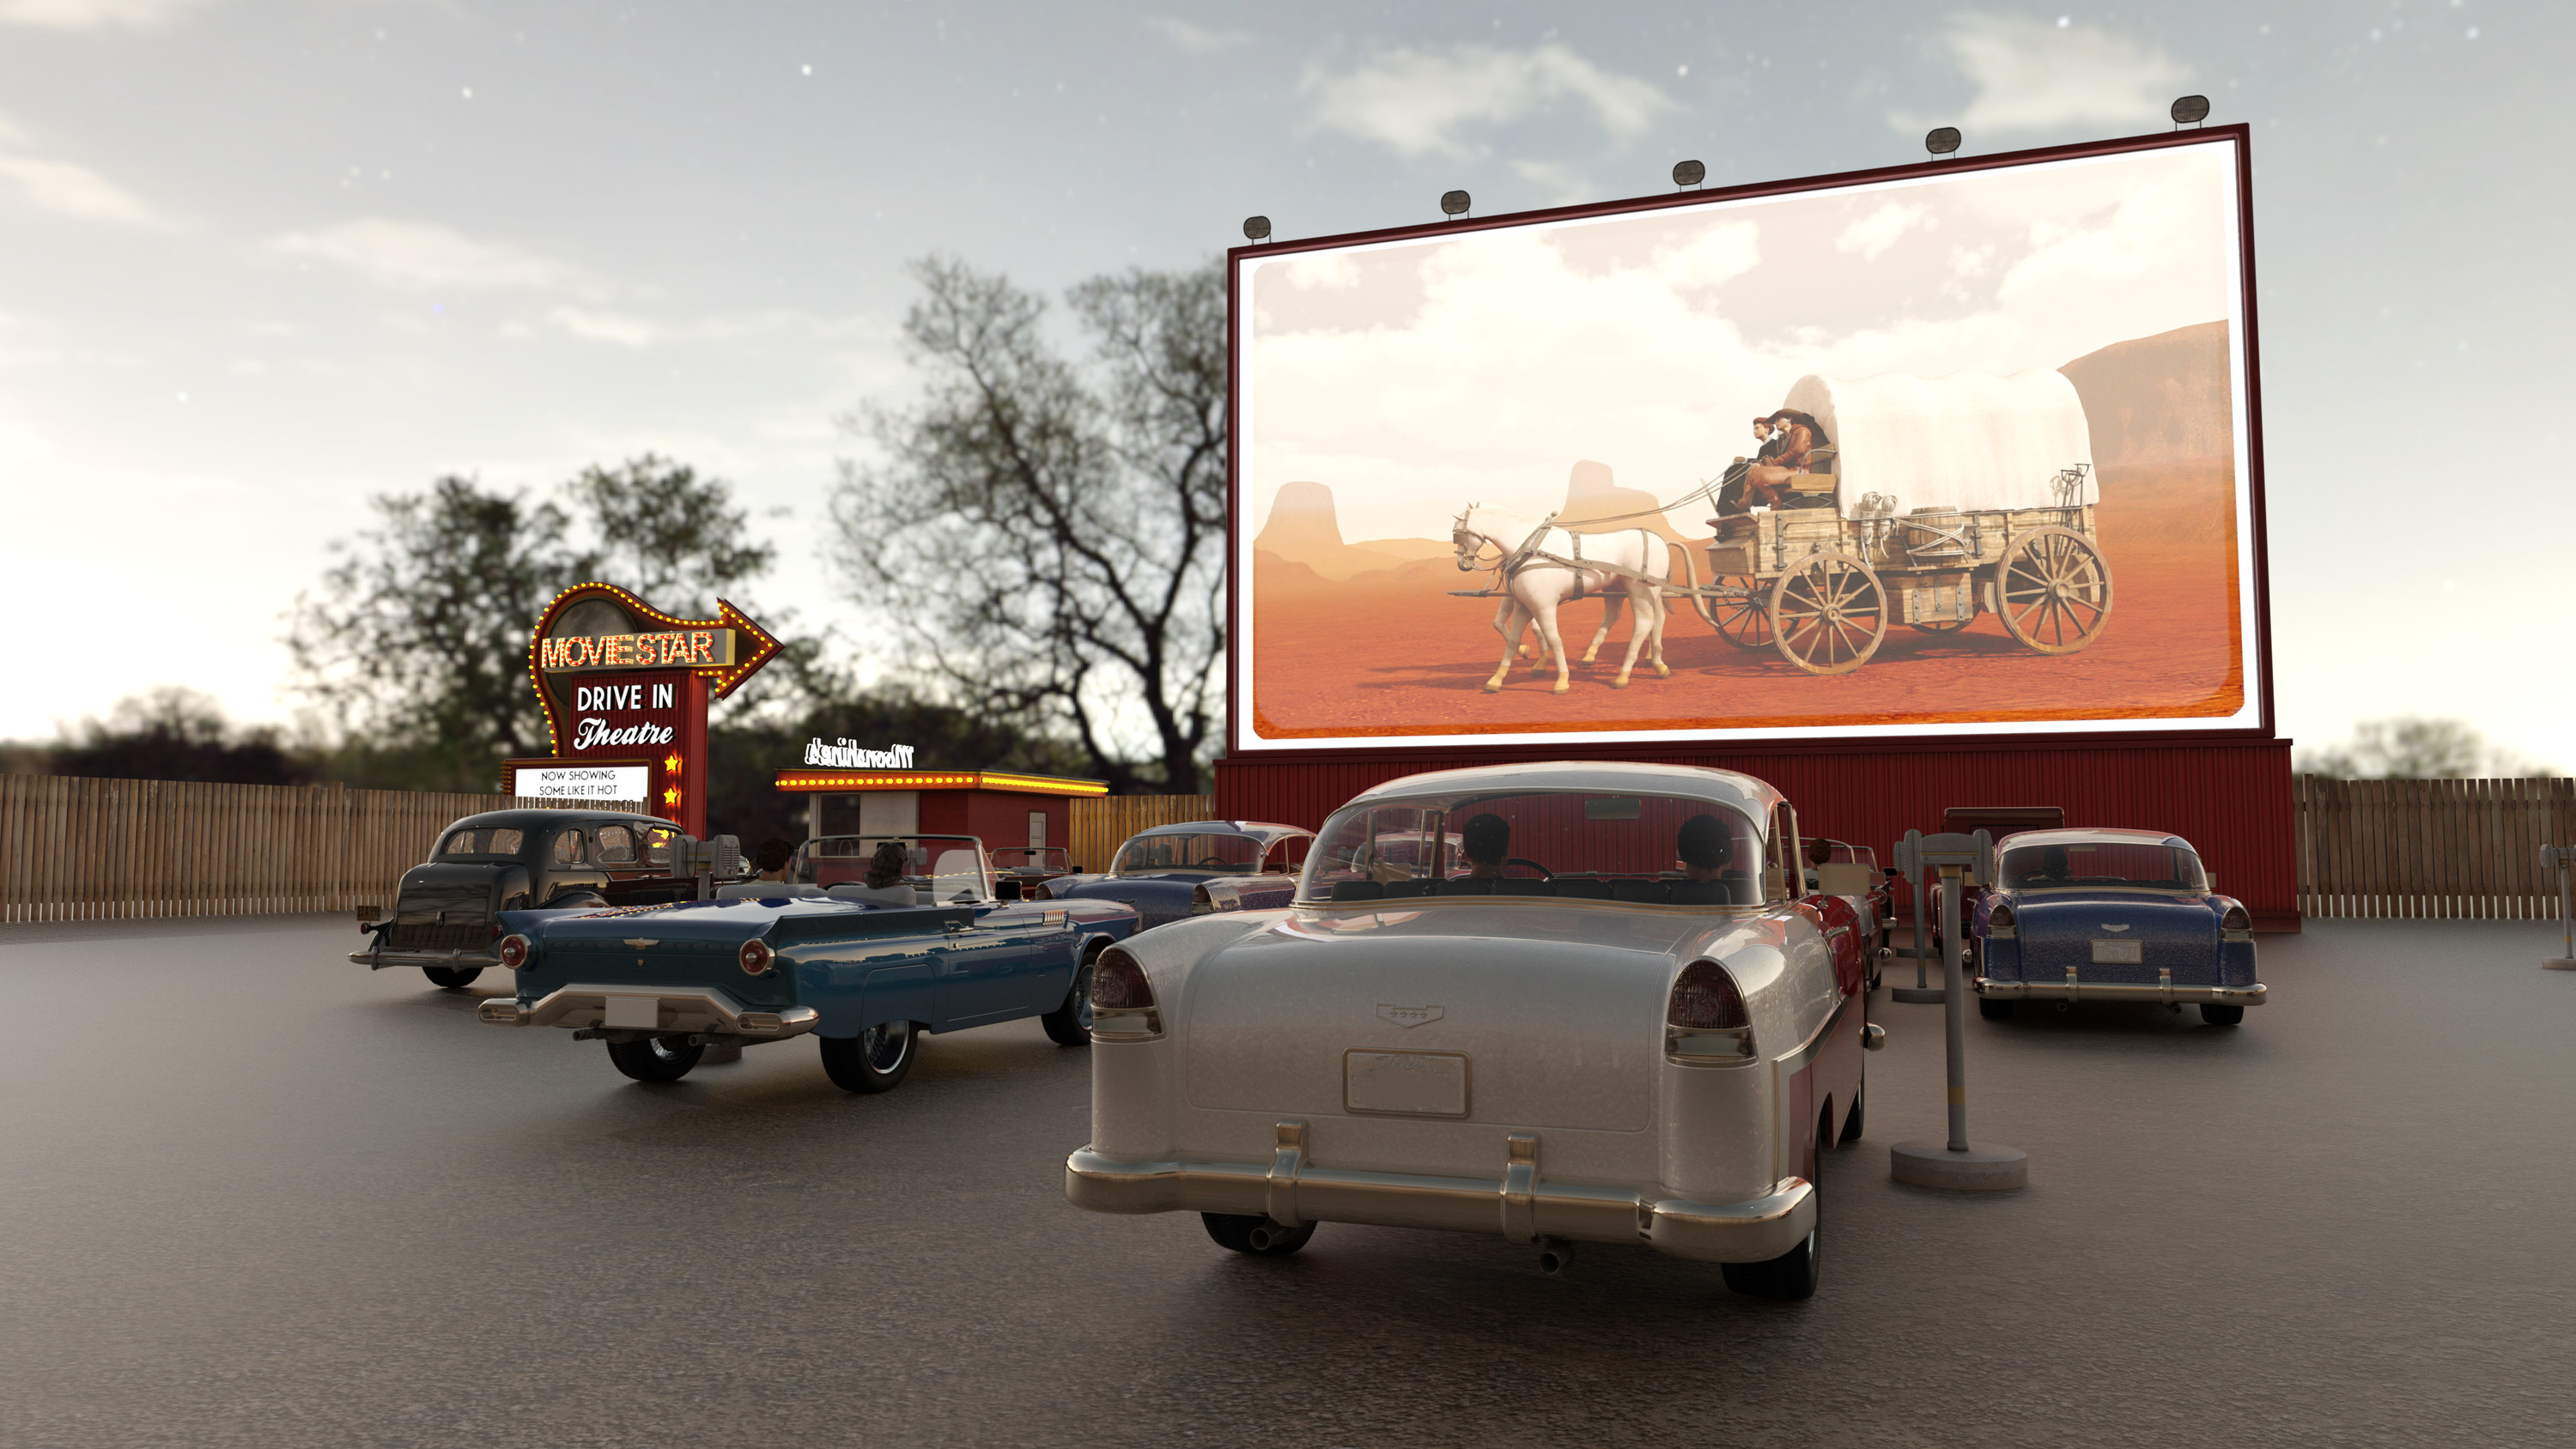 50s-style drive in movie theater with American classic cars